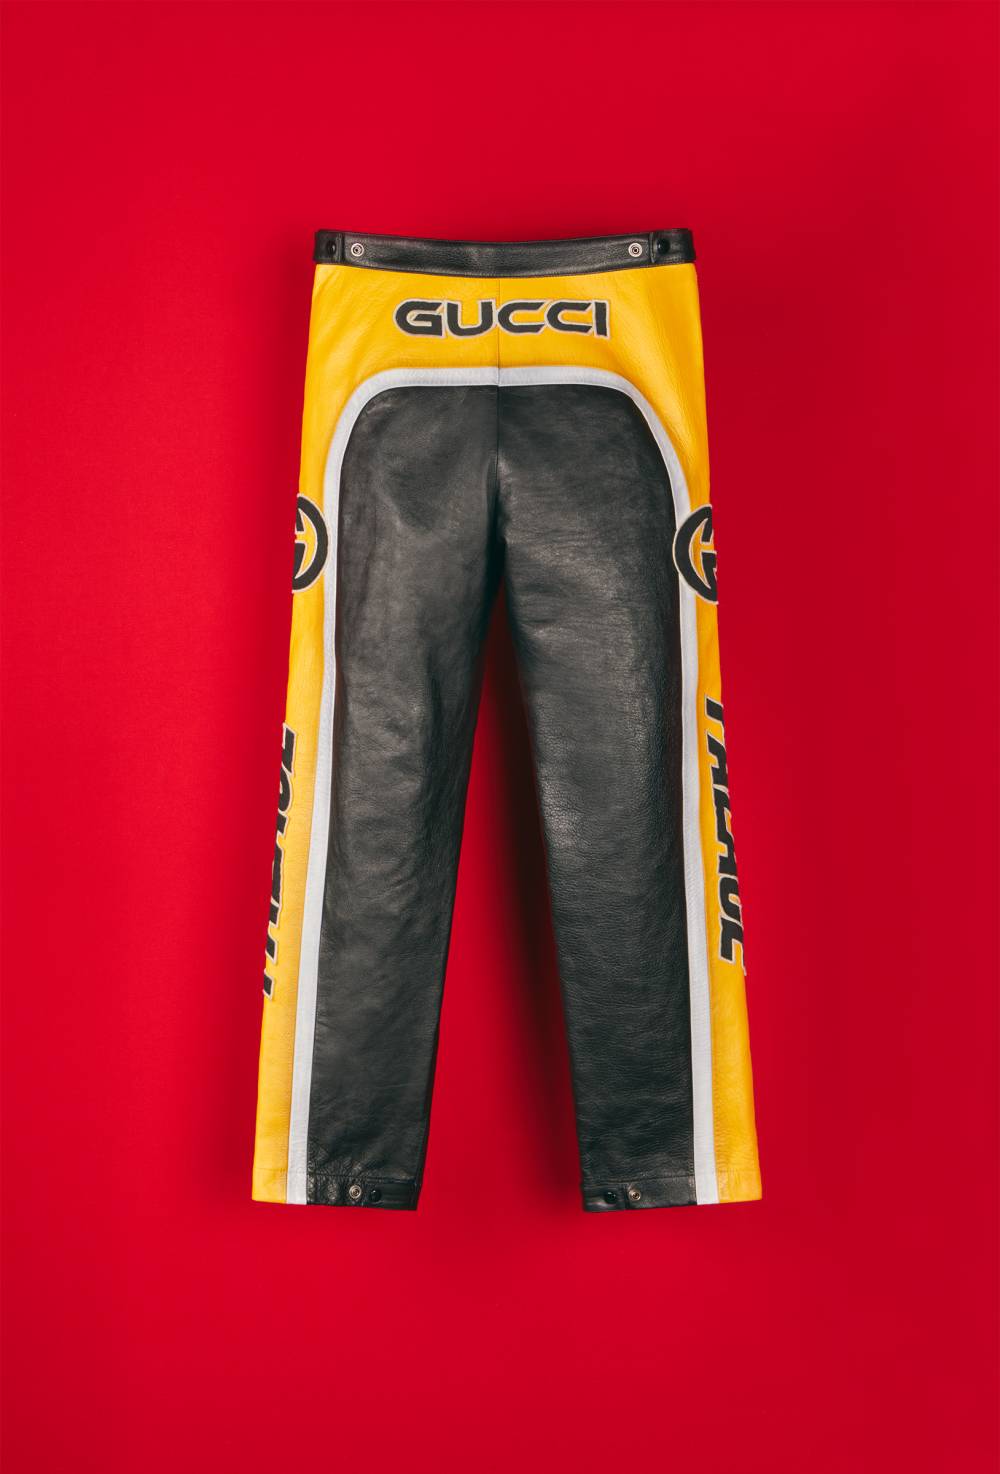 Leather pants with patches by Palace Gucci image #2